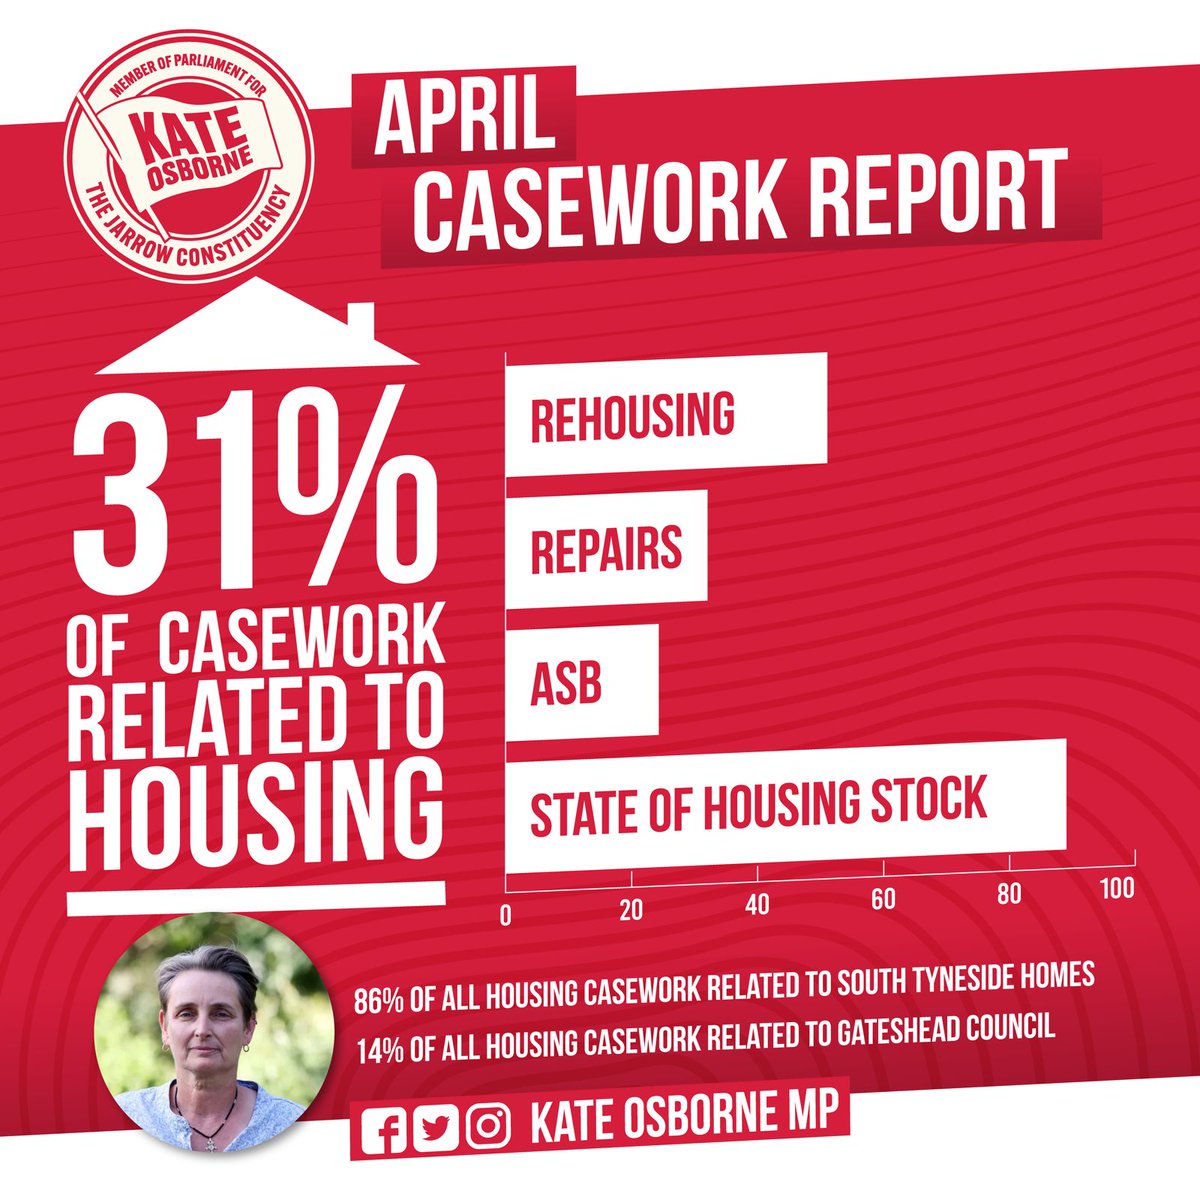 1/3 of casework in my office in the last 6 months has been in relation to access to safe & affordable housing Tory cuts have created #HousingCrisis with lack of investment into social housing - we need a change @UKLabour will #GetBritainBuildingAgain & invest in social housing